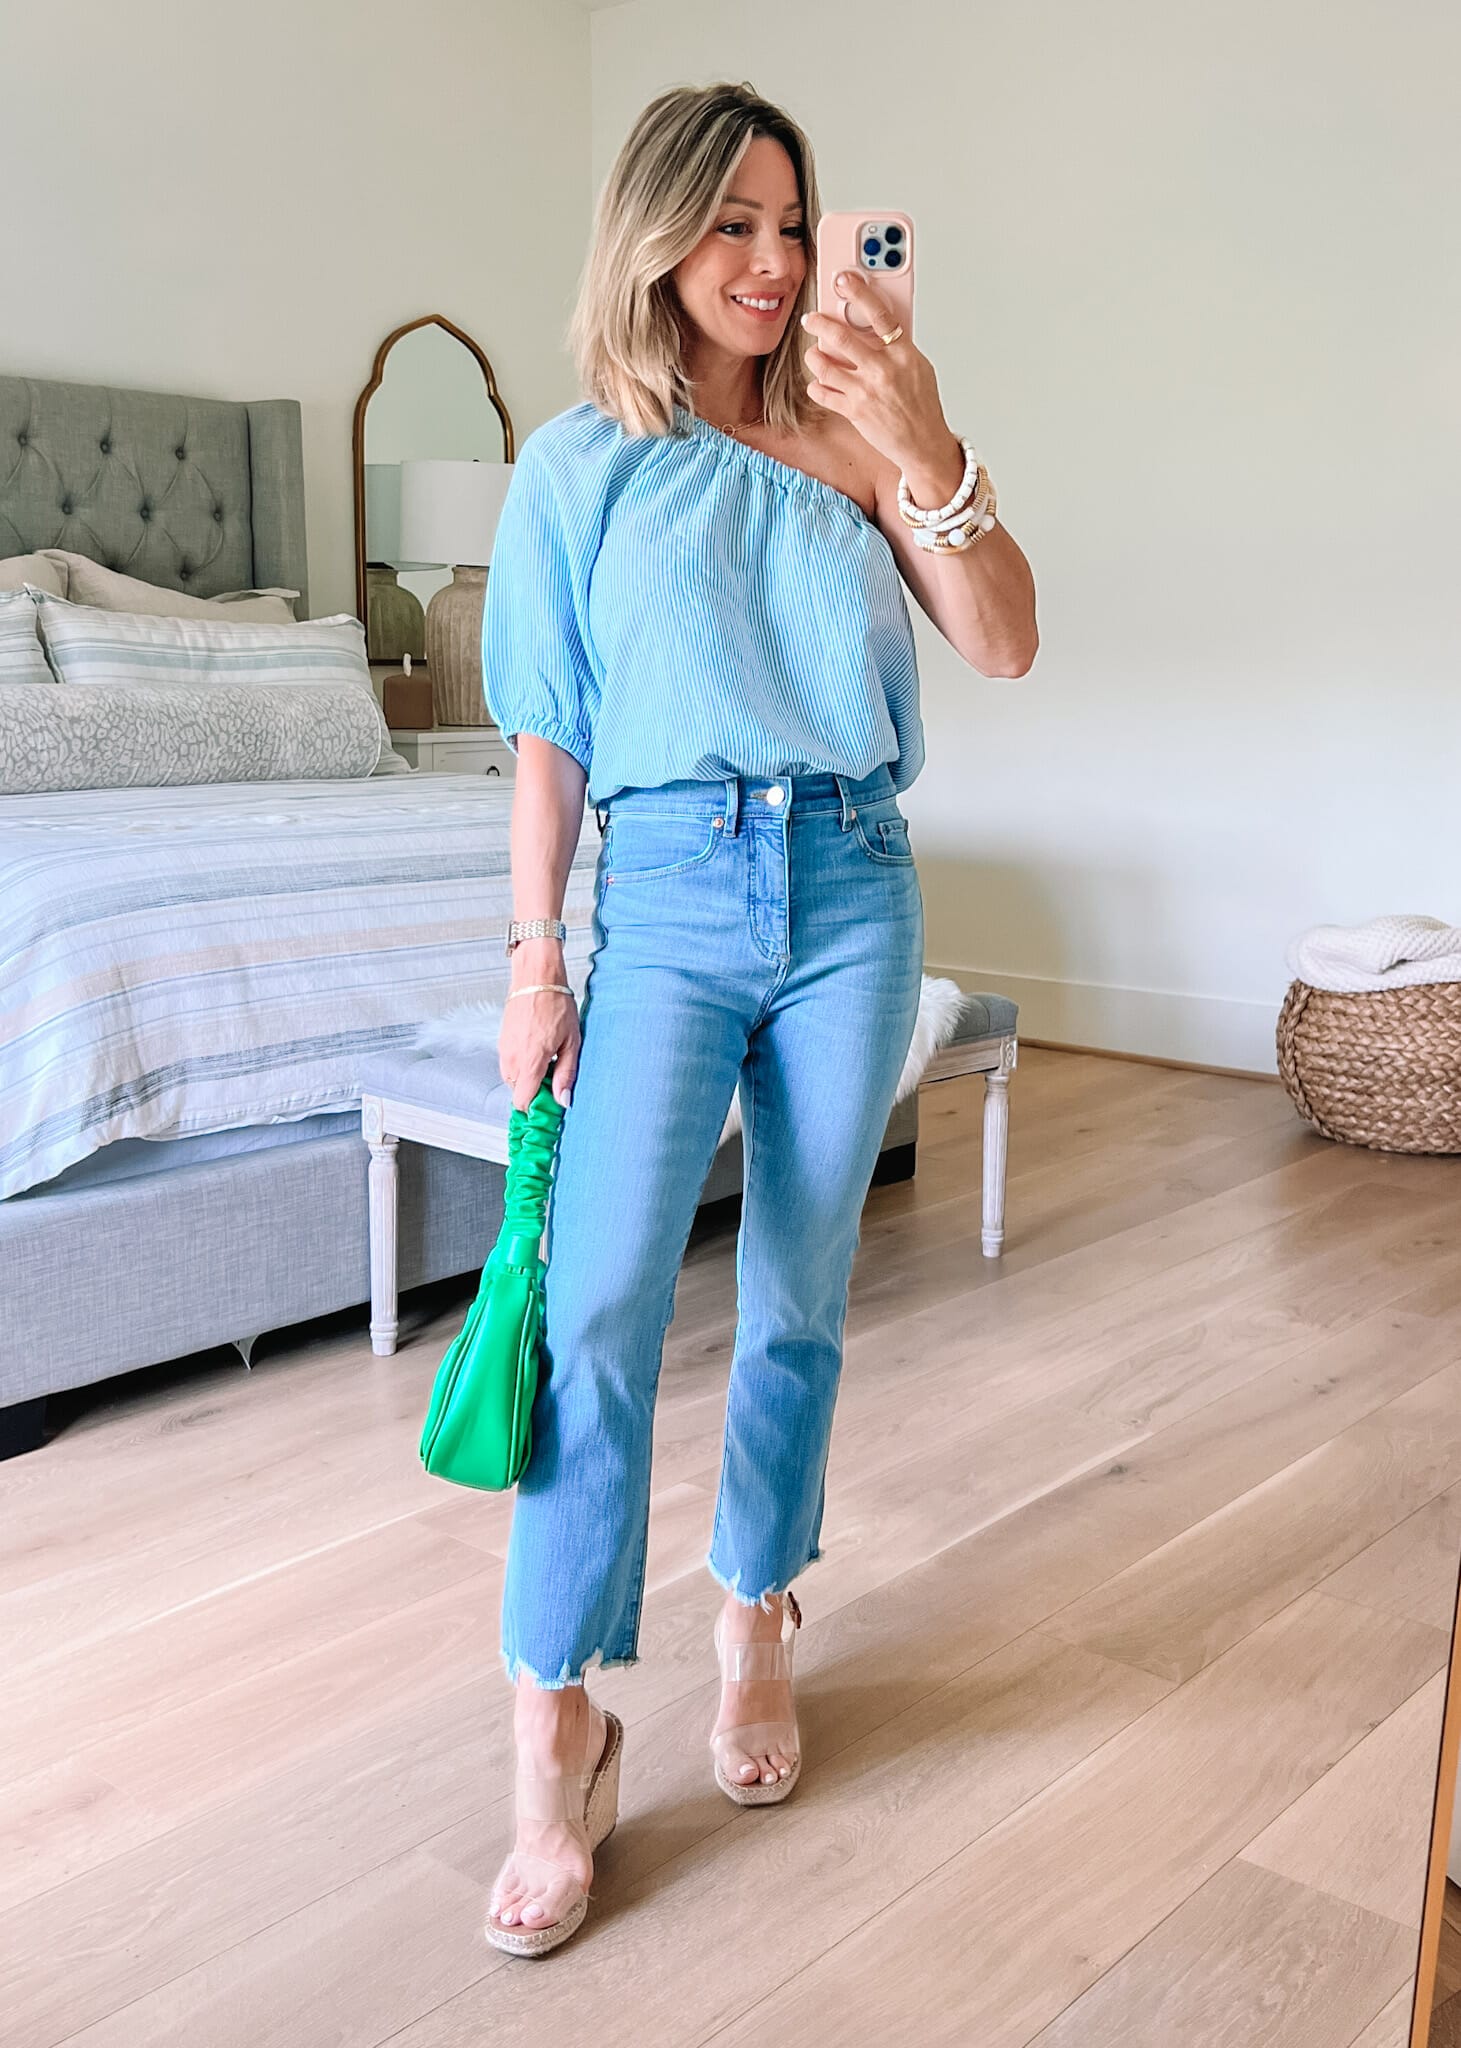 One Shoulder Striped Top, jeans, Wedges, Green Purse